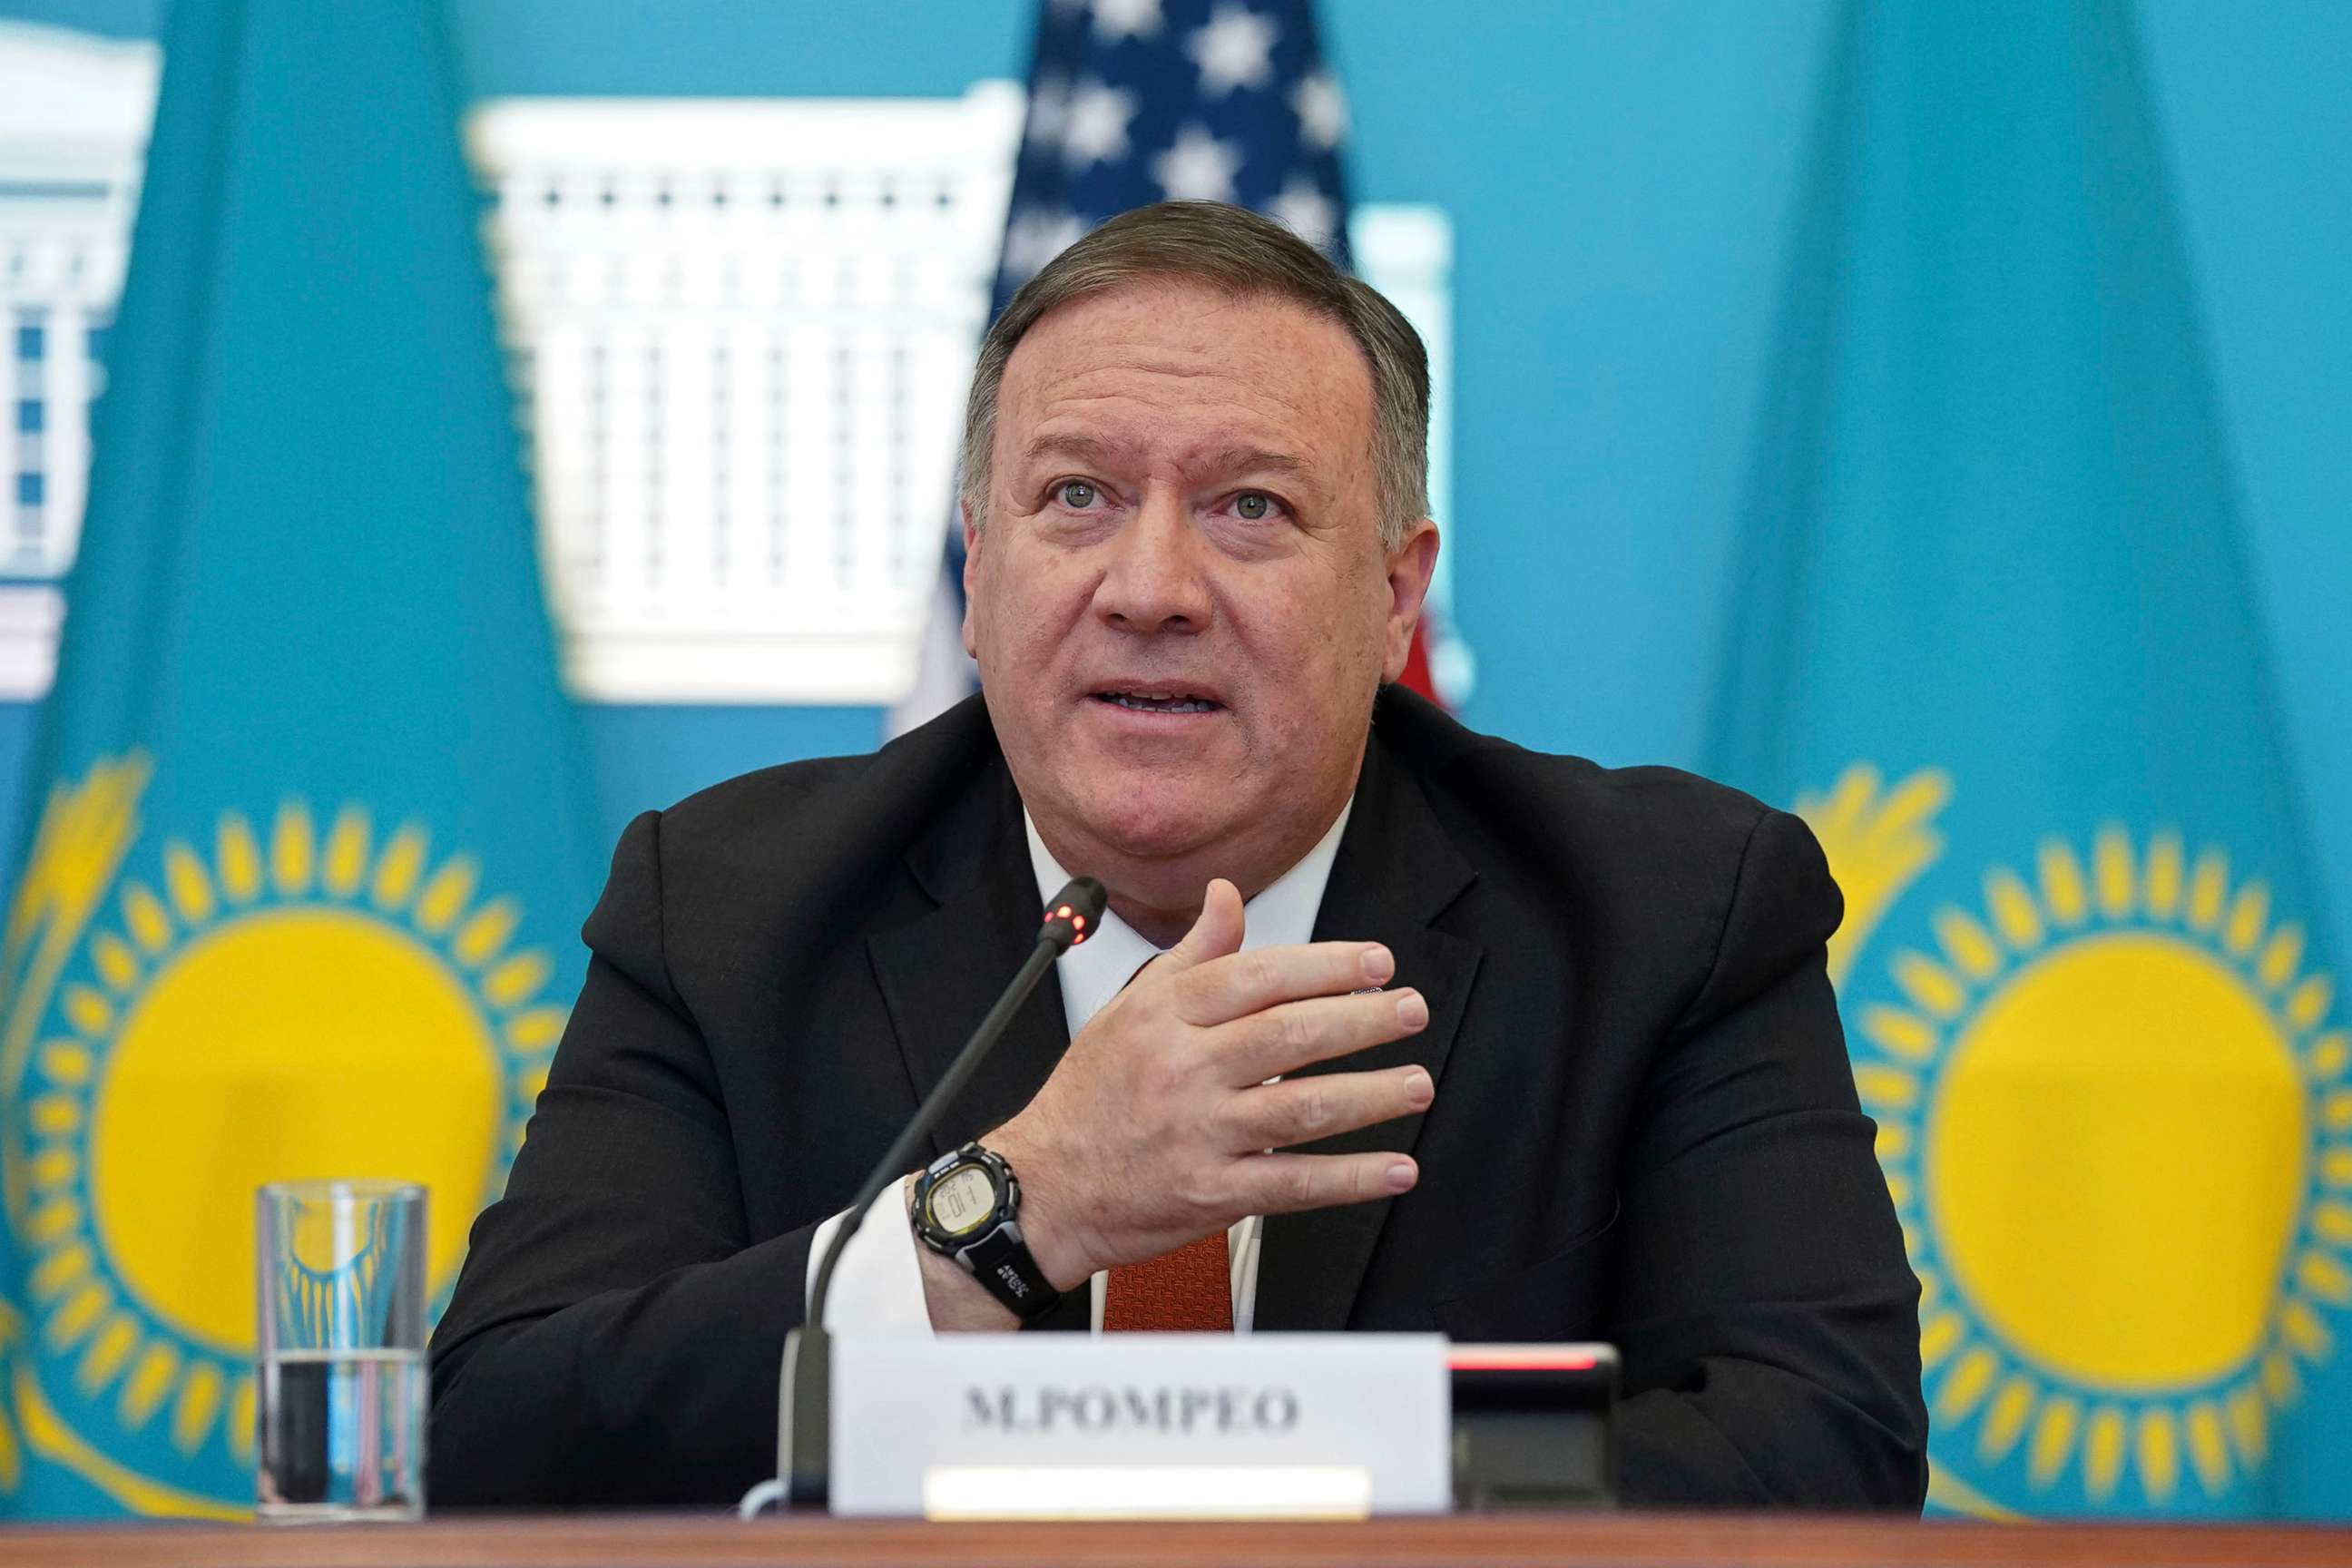 PHOTO: Secretary of State Mike Pompeo holds a joint news conference with Kazakh Foreign Minister Mukhtar Tleuberdi at the Ministry of Foreign Affairs in Nur-Sultan, Kazakhstan, Feb. 2, 2020.